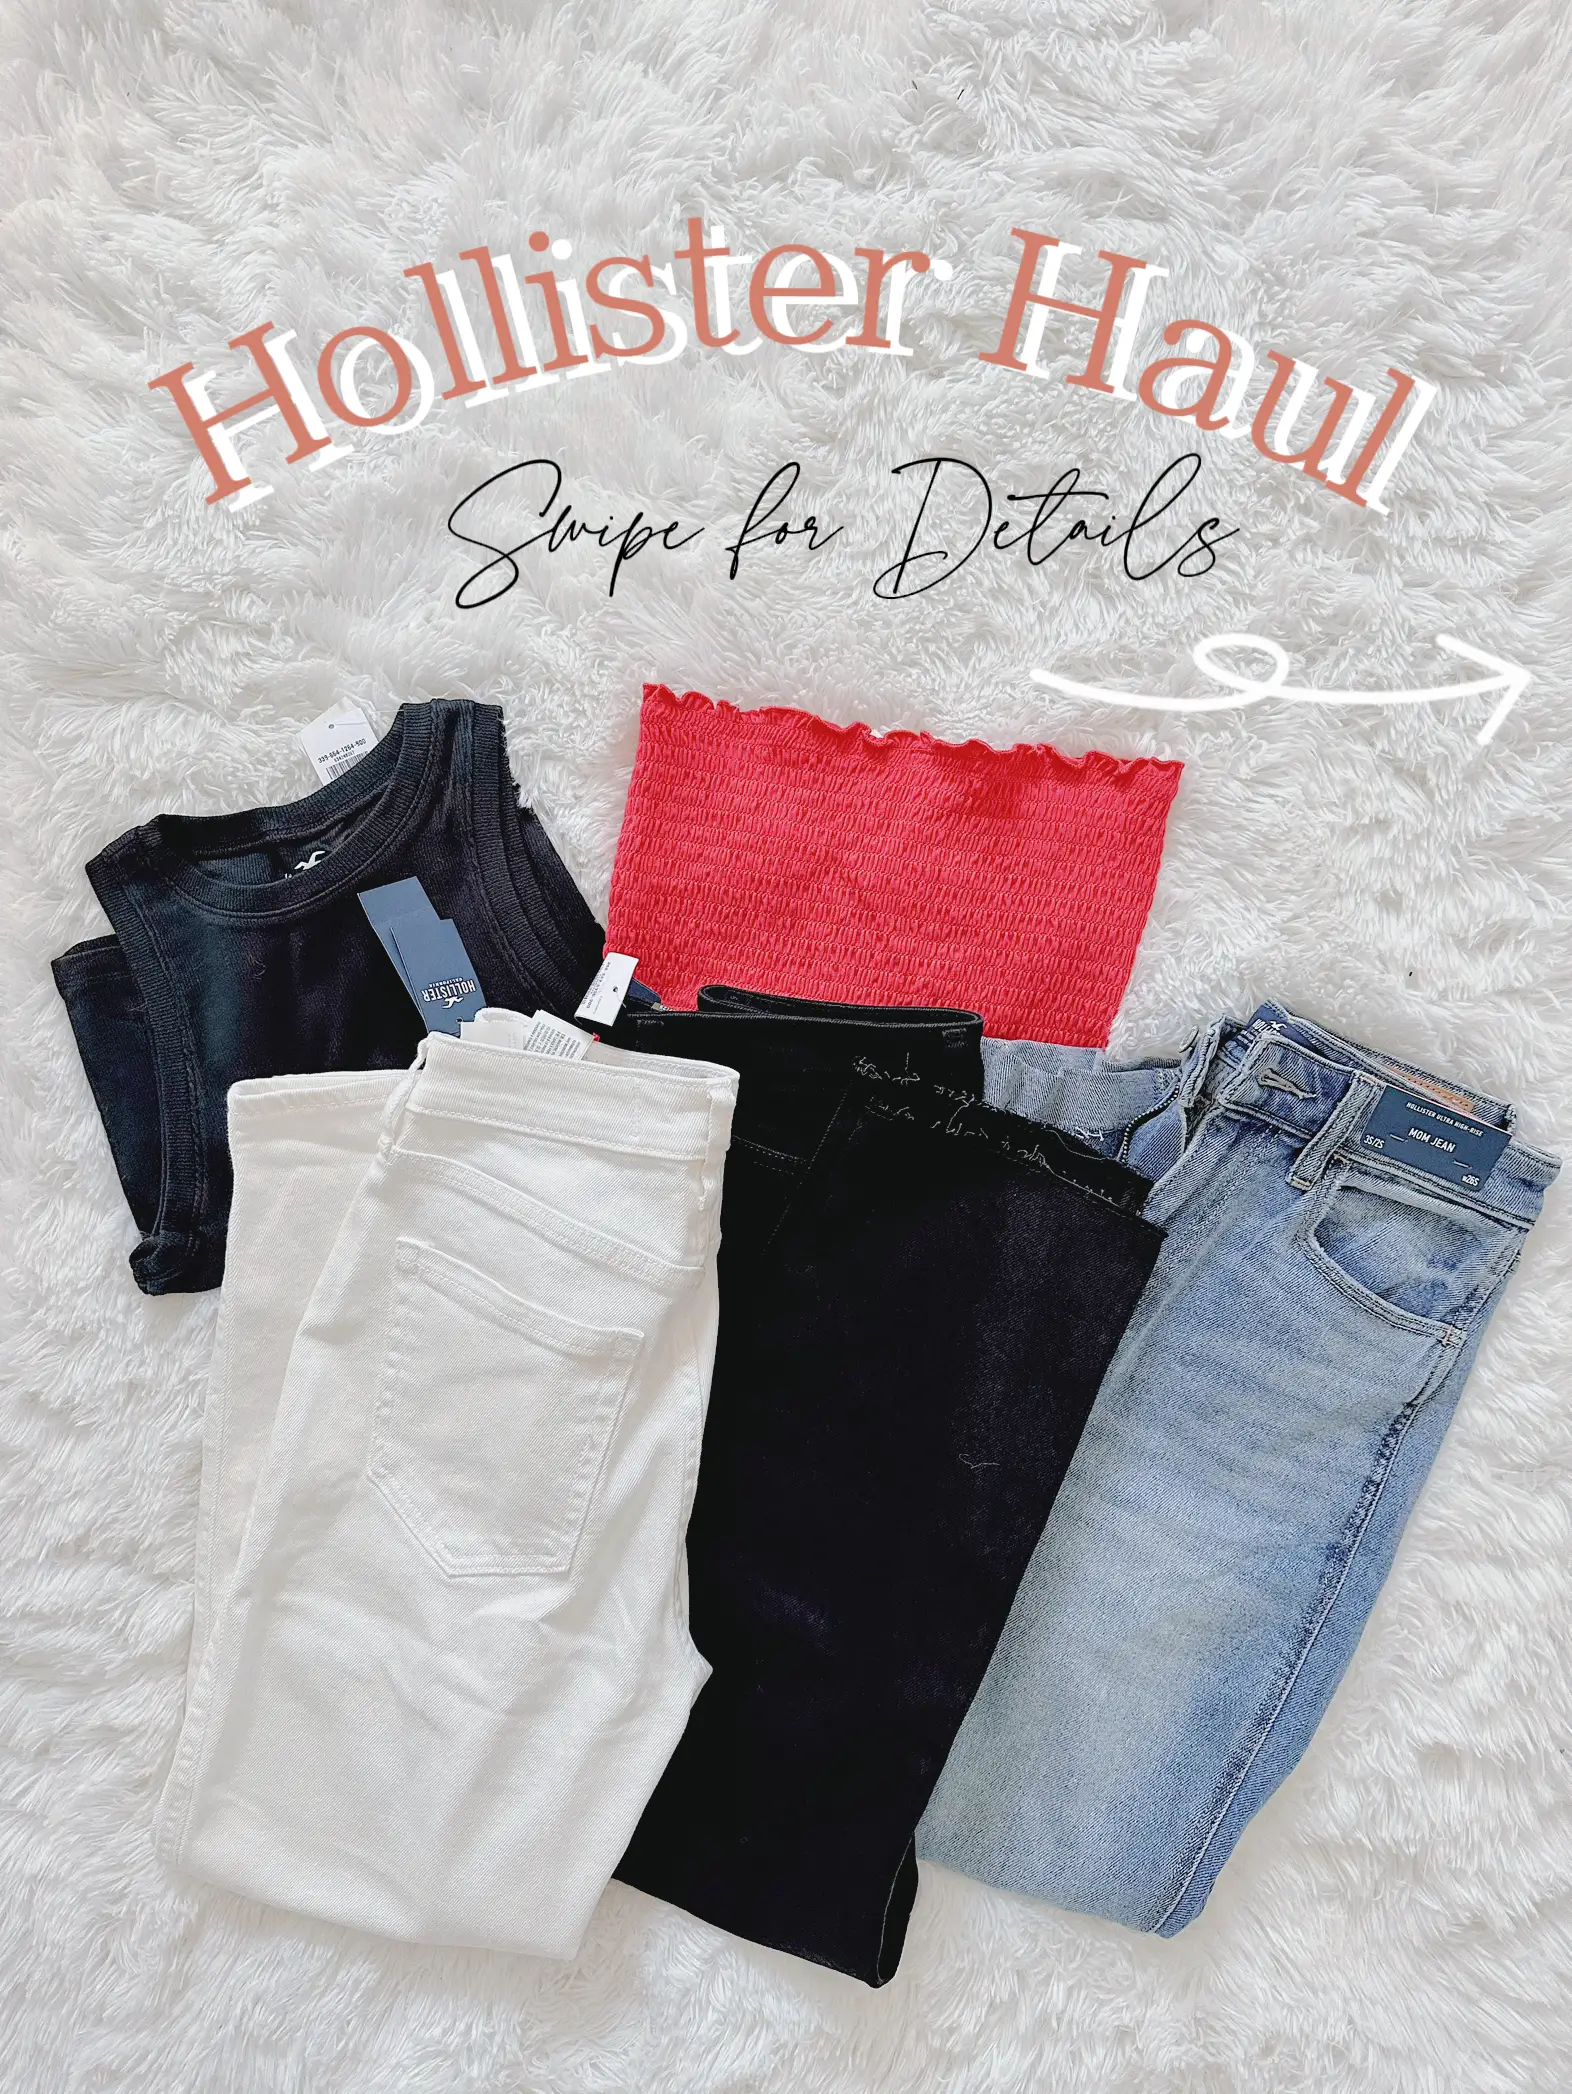 HOLLISTER JEAN HAUL~ FLARED JEANS~ DAD JEANS~ MOM JEANS~ BOOT LEG